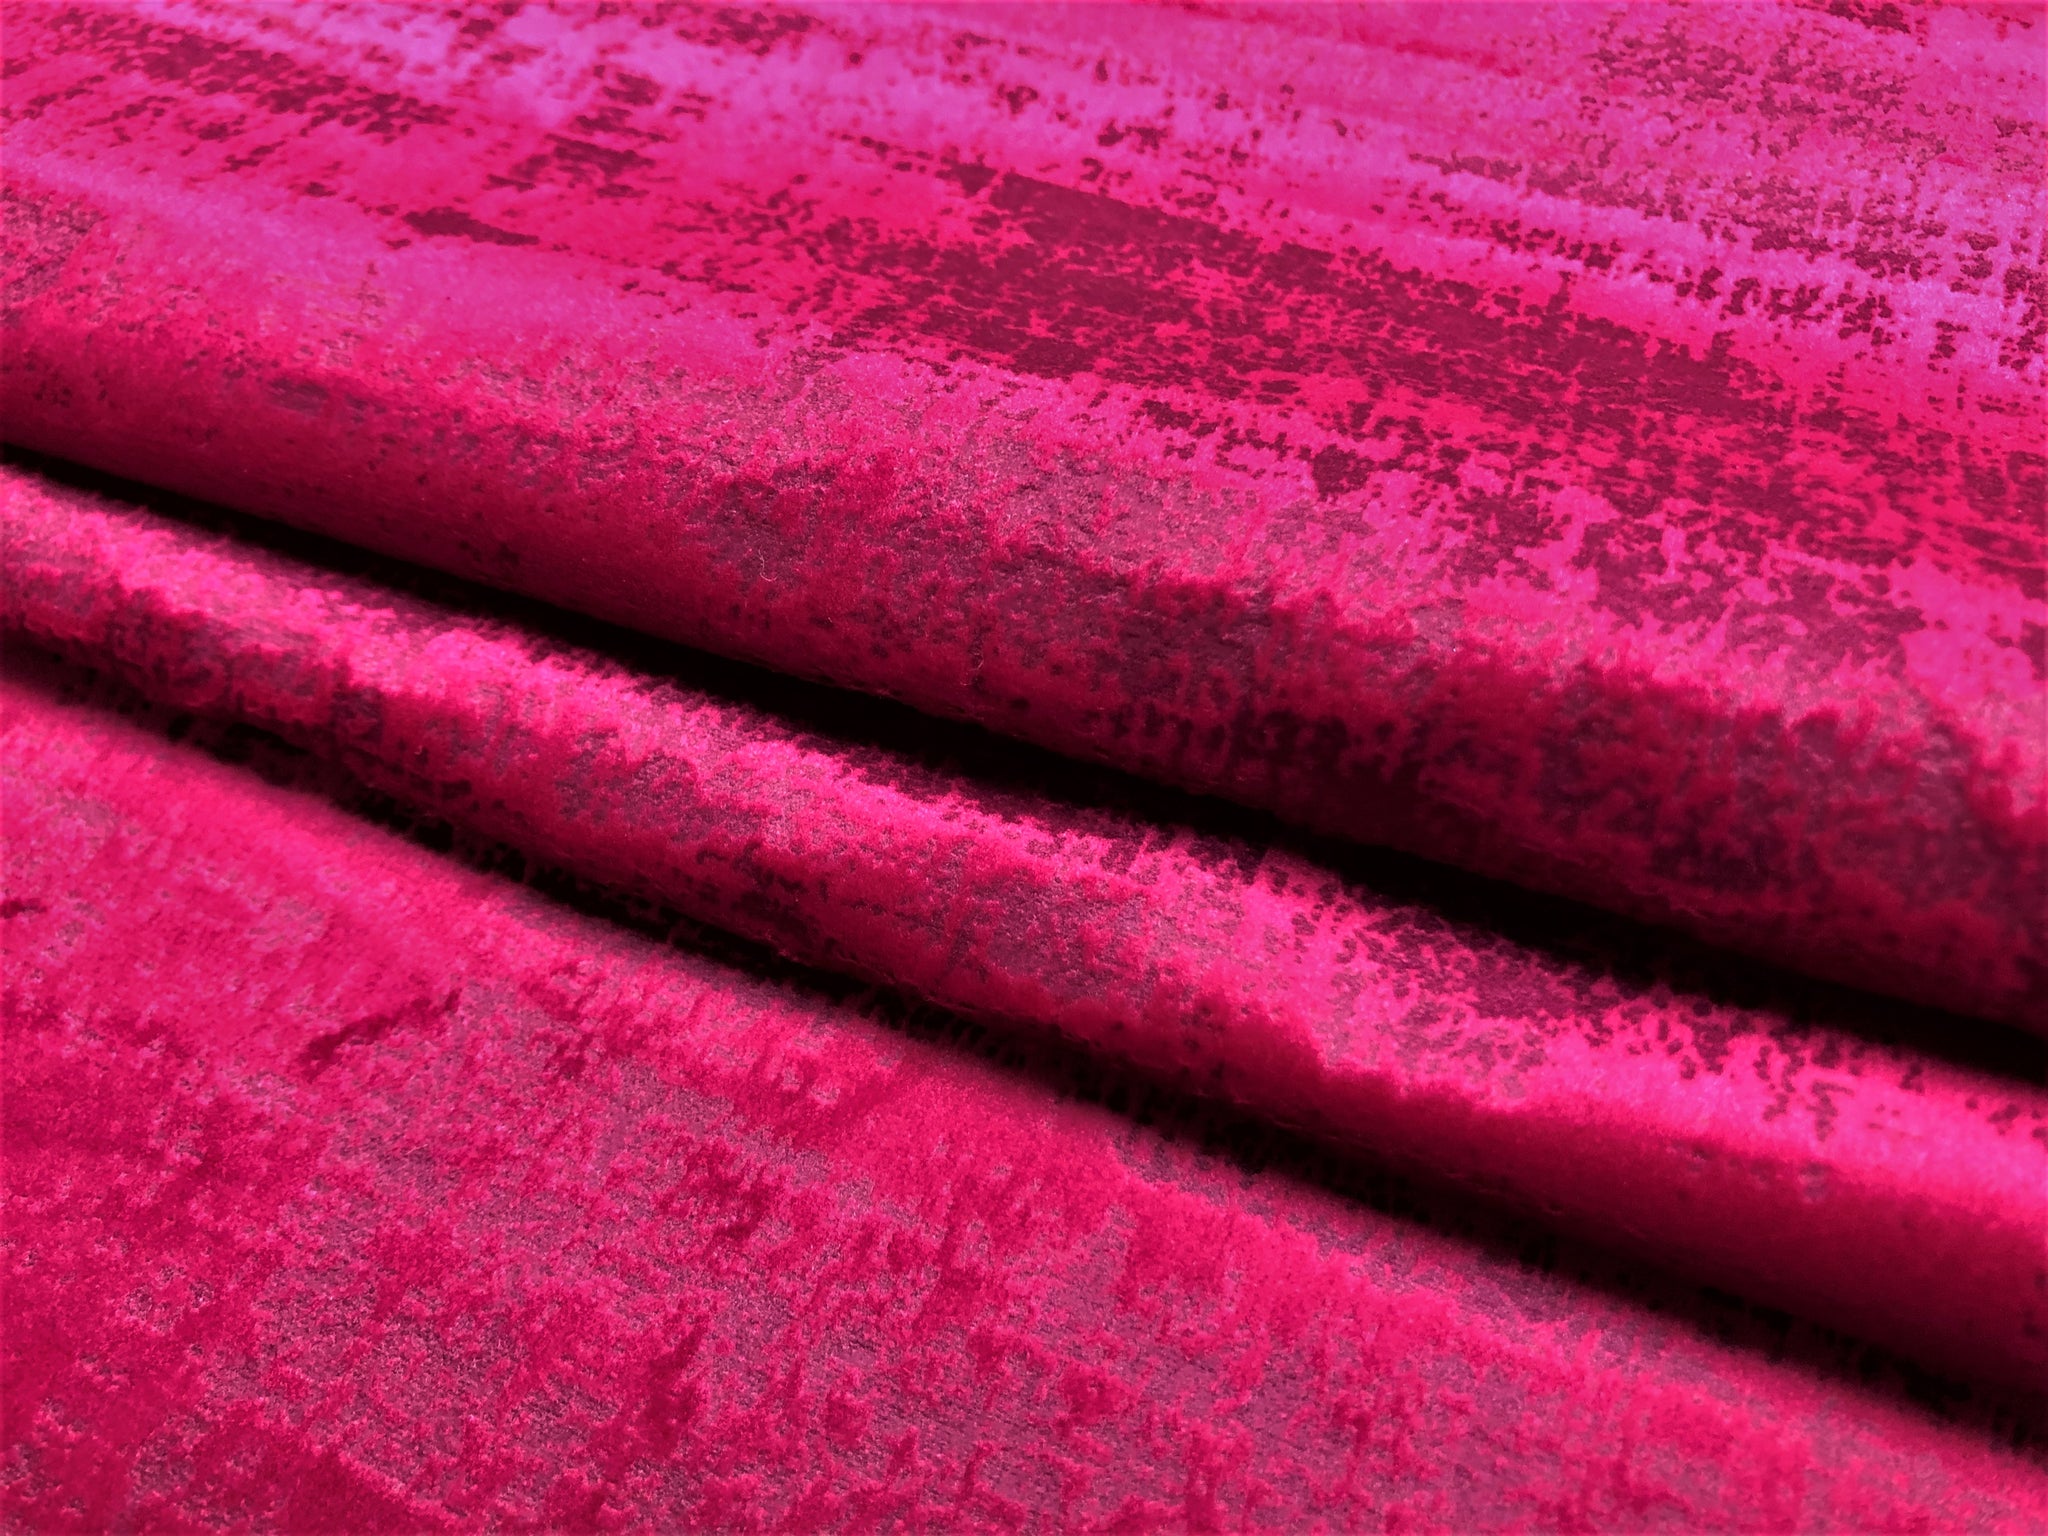 McAlister Textiles Shiny Velvet Fabric by The Yard Plain Fuchsia Pink  Crushed Velvet Material for Sewing Curtain & Upholstery 55 Inches Width